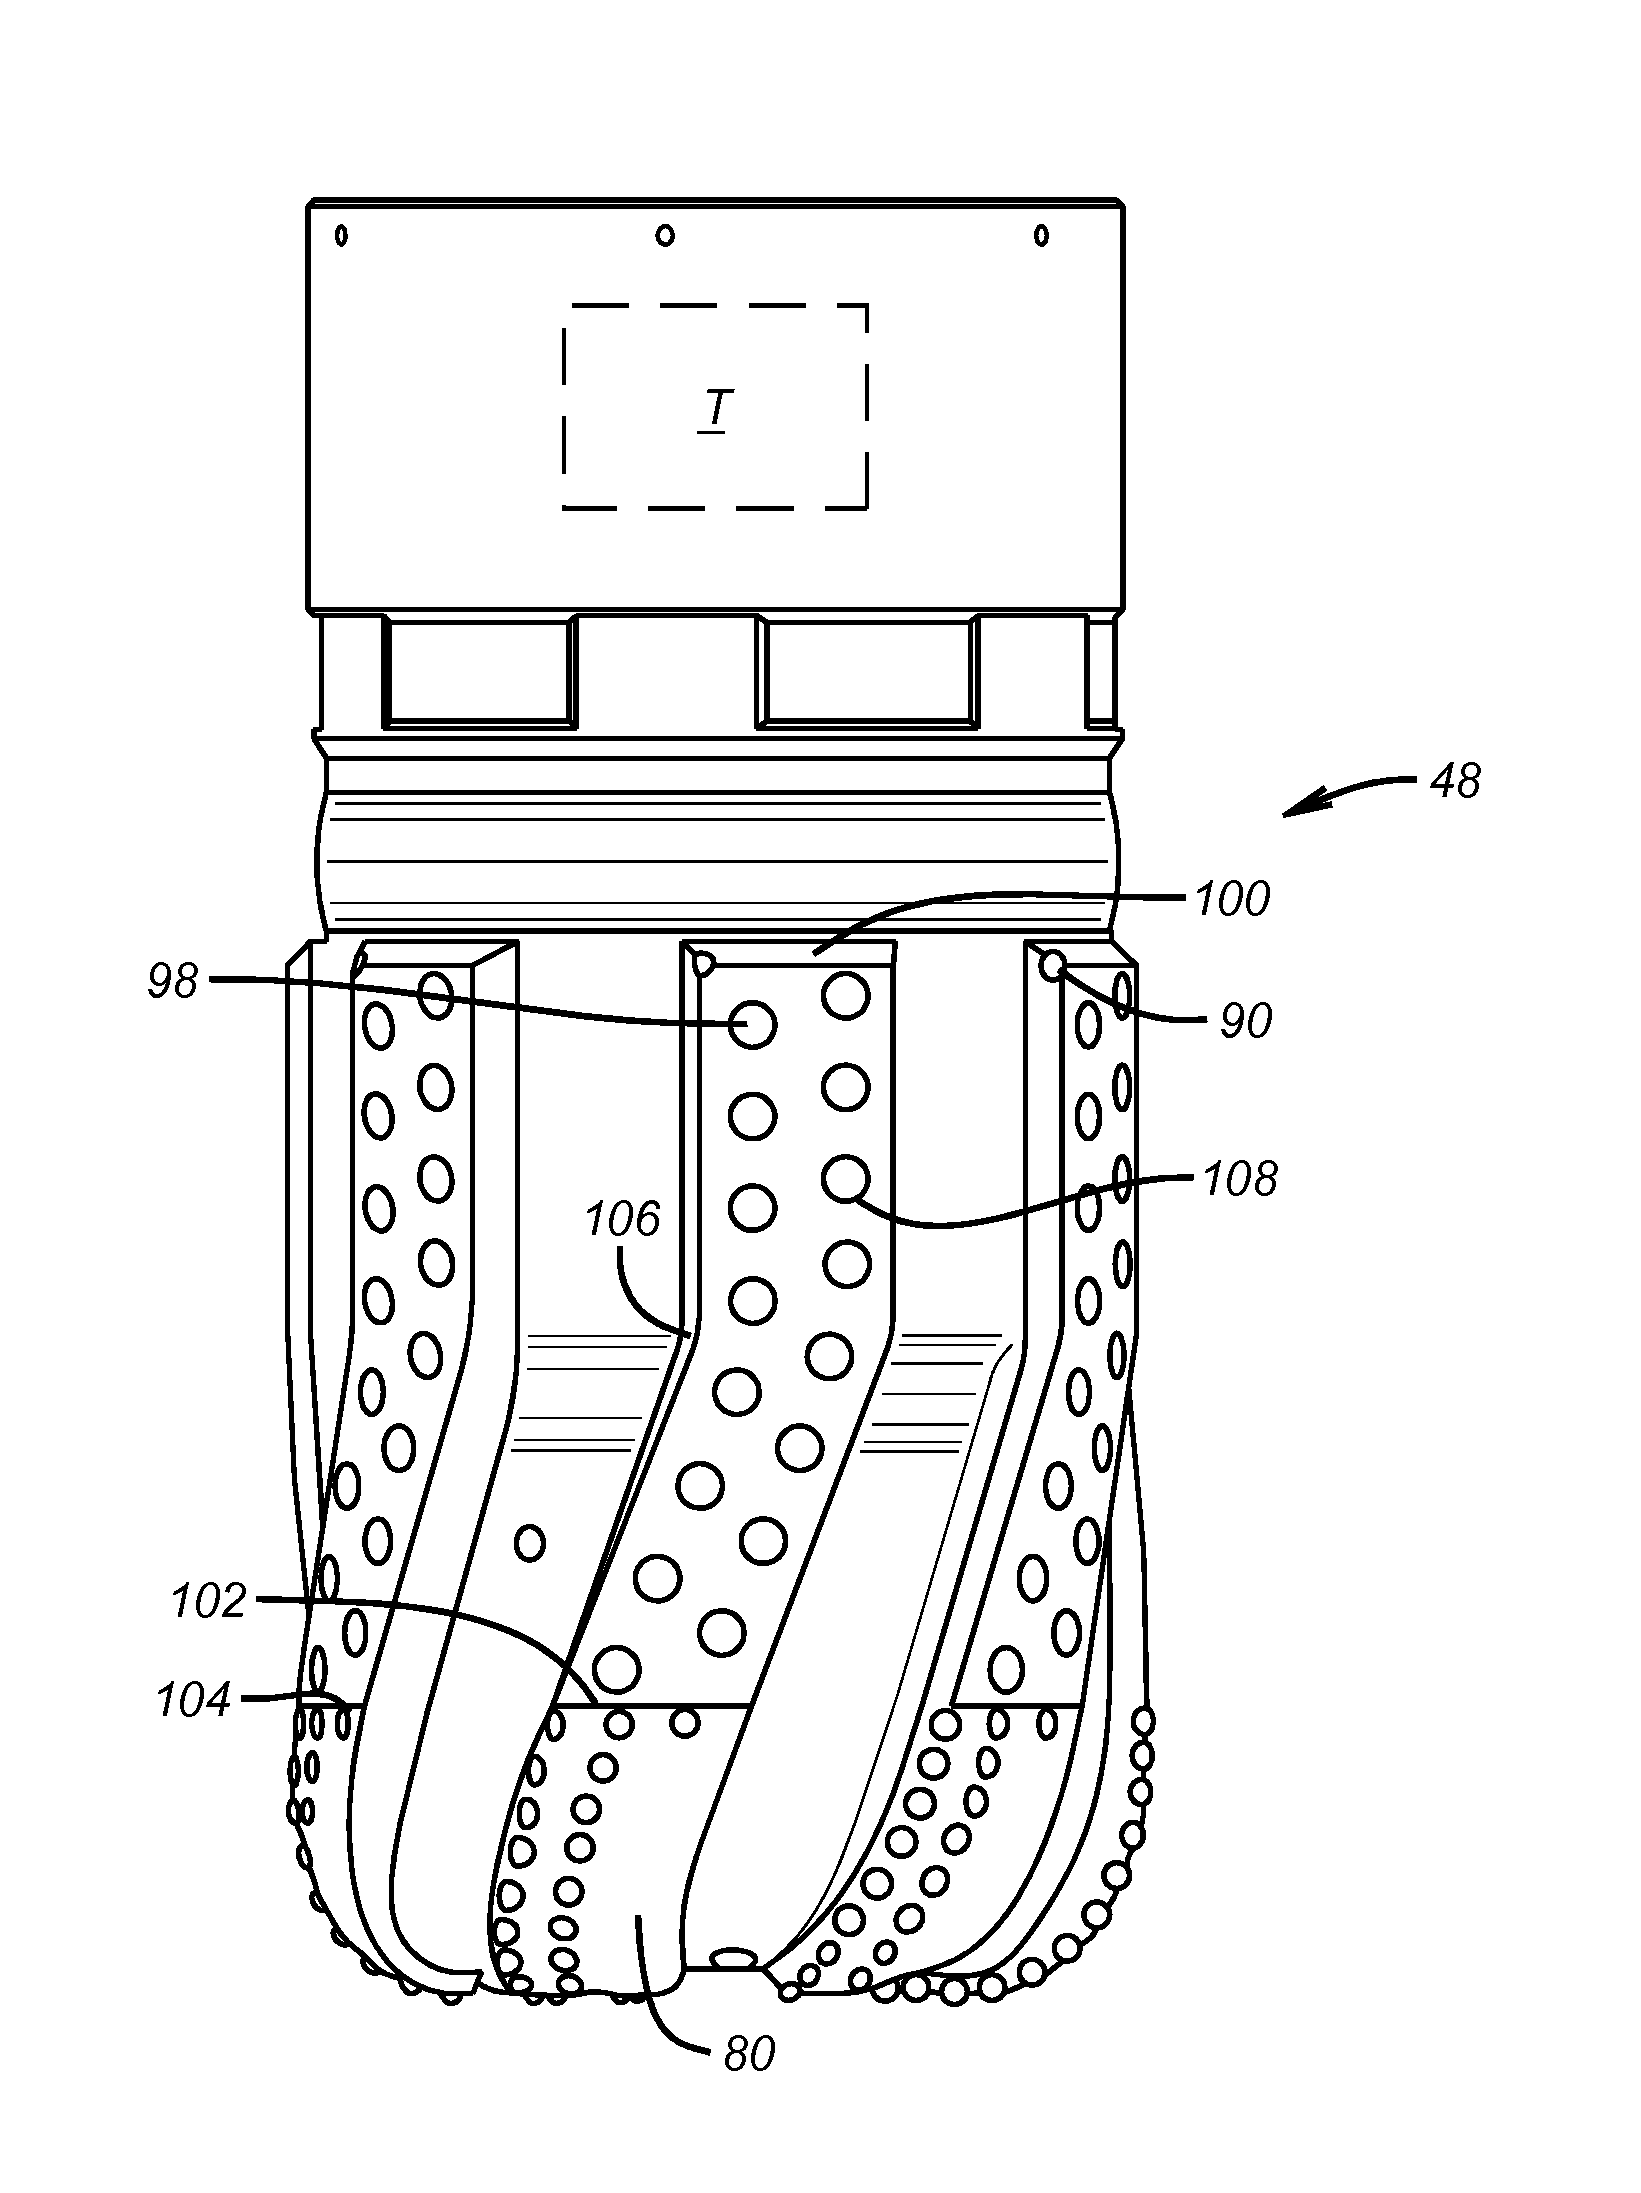 Turbine driven reaming bit with blades and cutting structure extending into concave nose